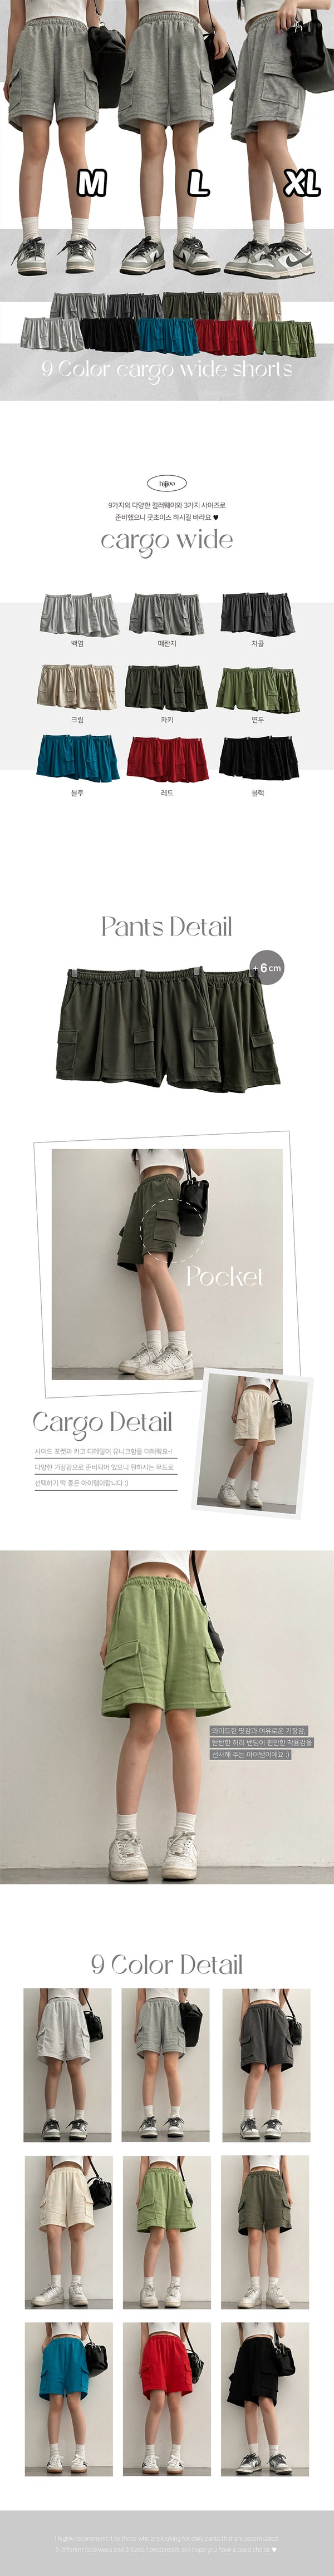 [M/L/XL] TOTO cargo wide shorts